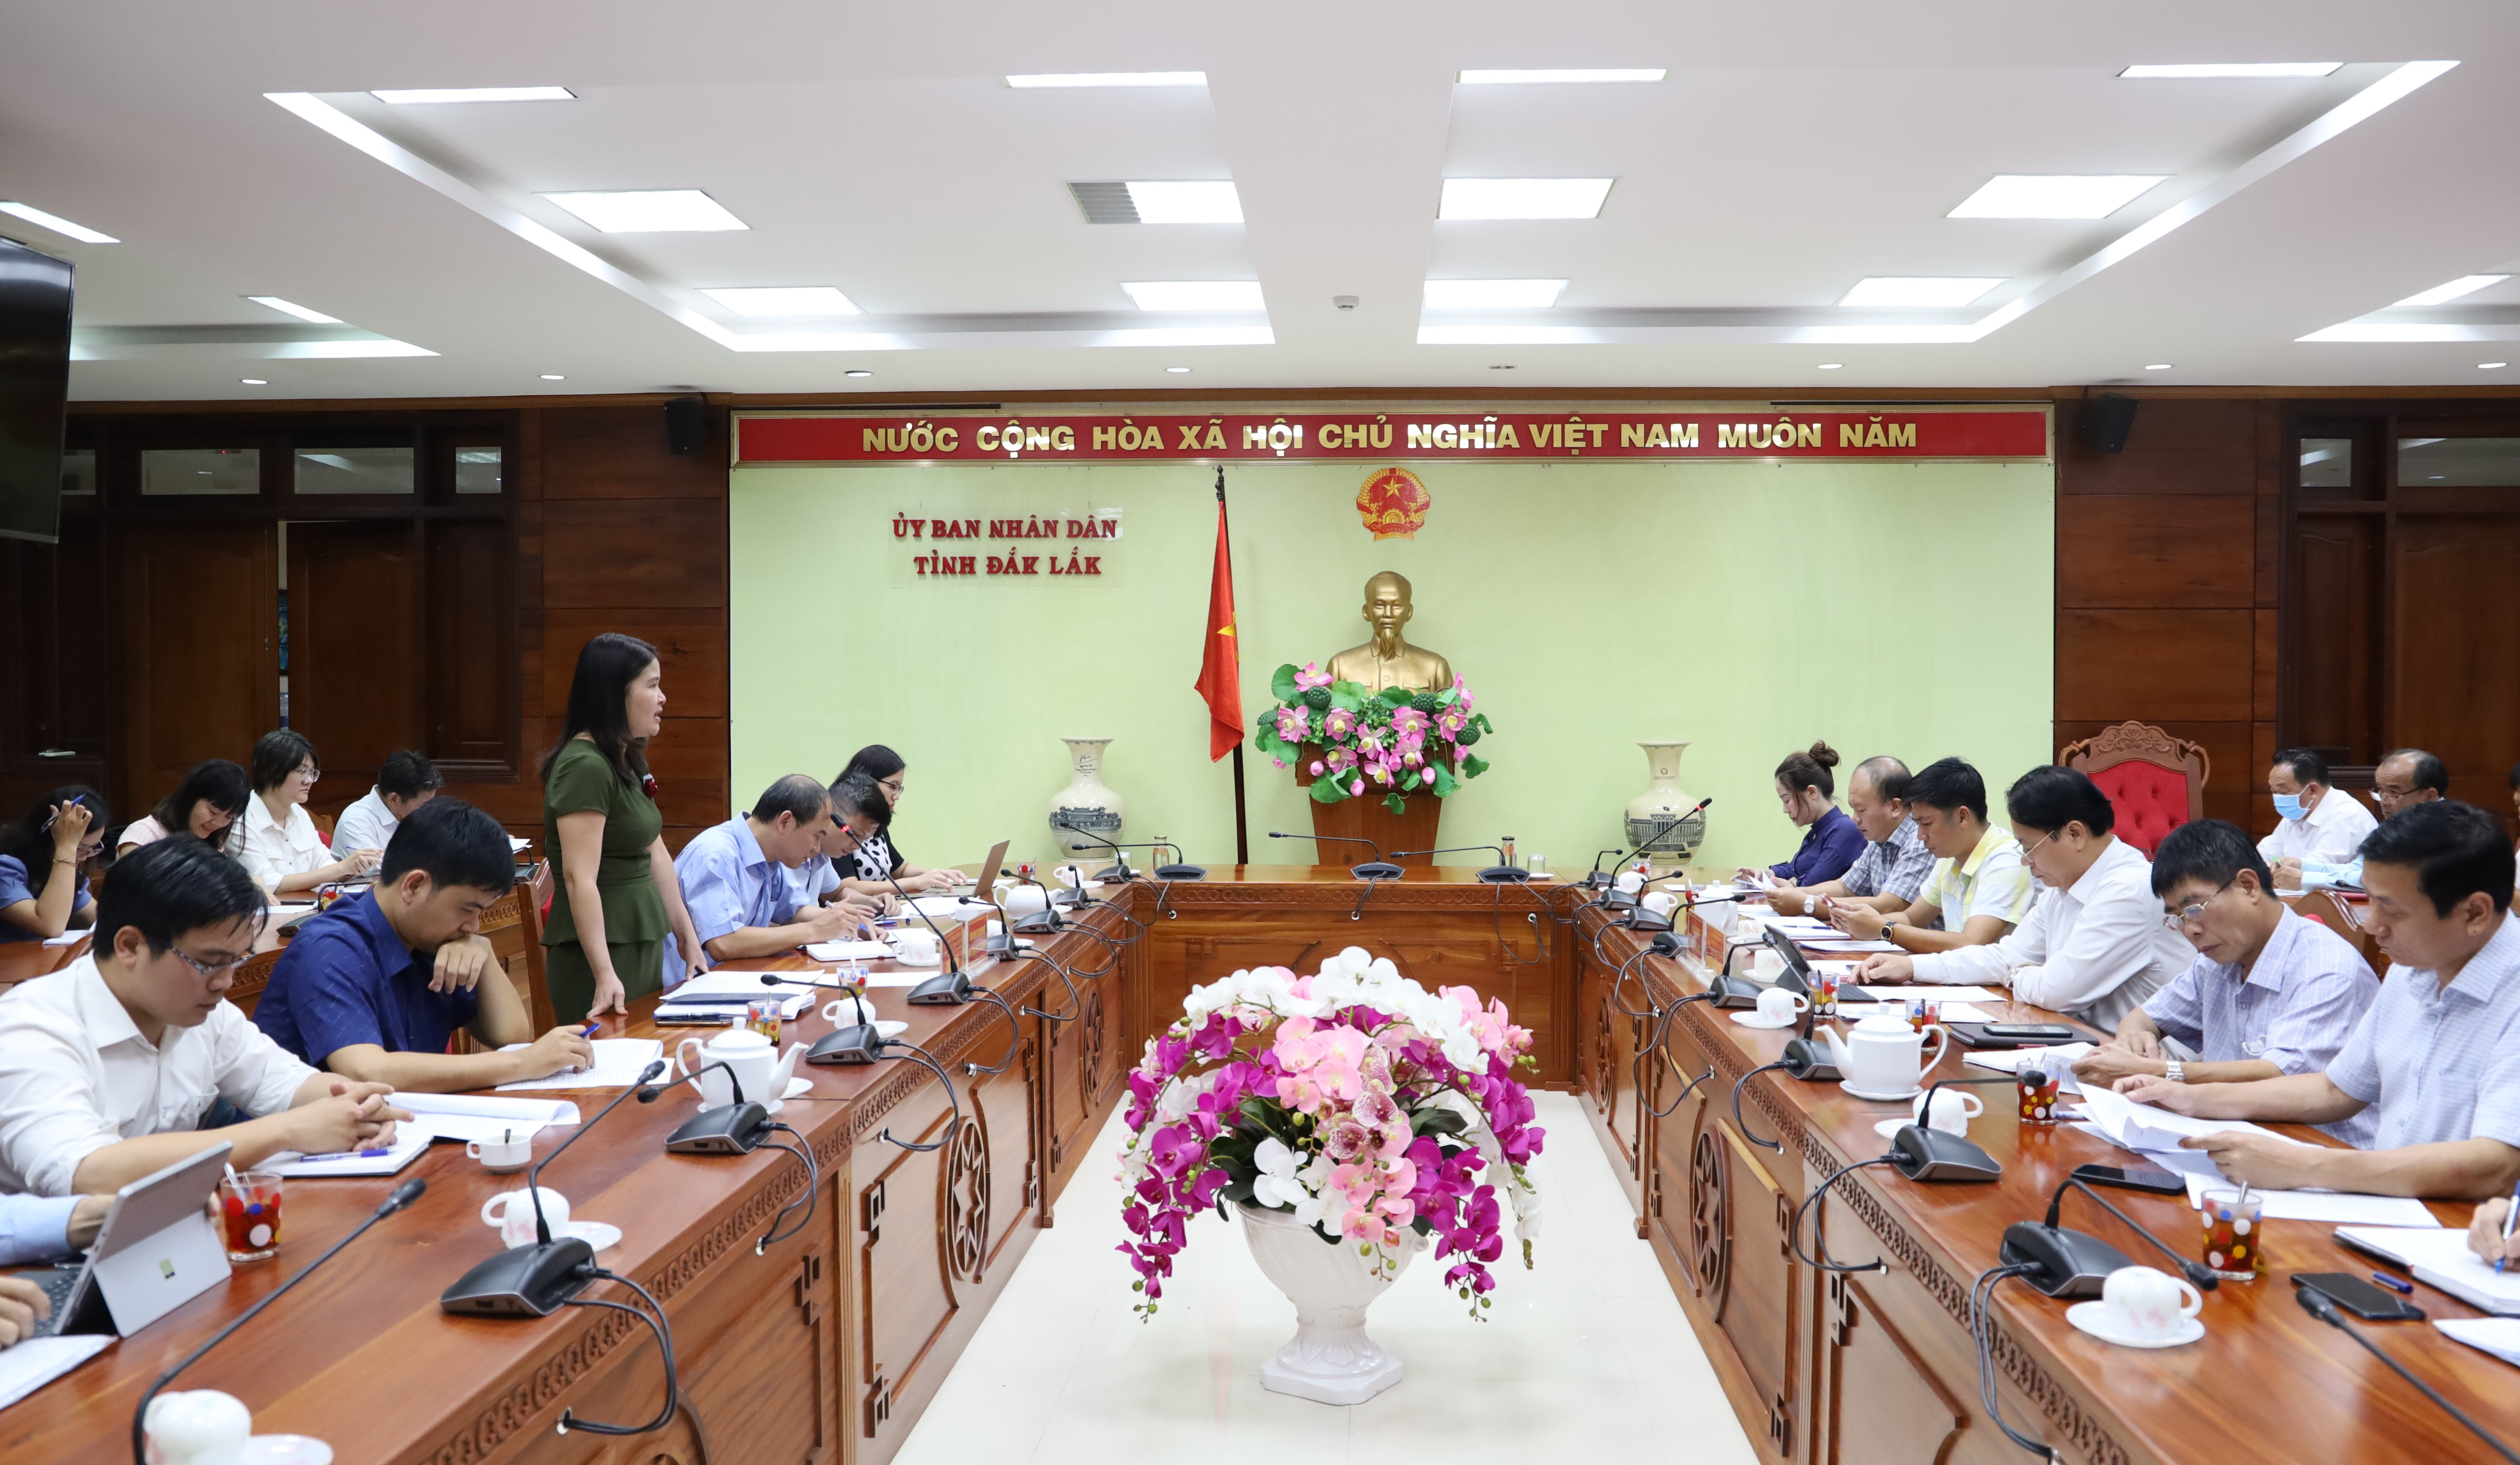 Twenty-nine newly-established co-operatives in Dak Lak in the first six months of 2022